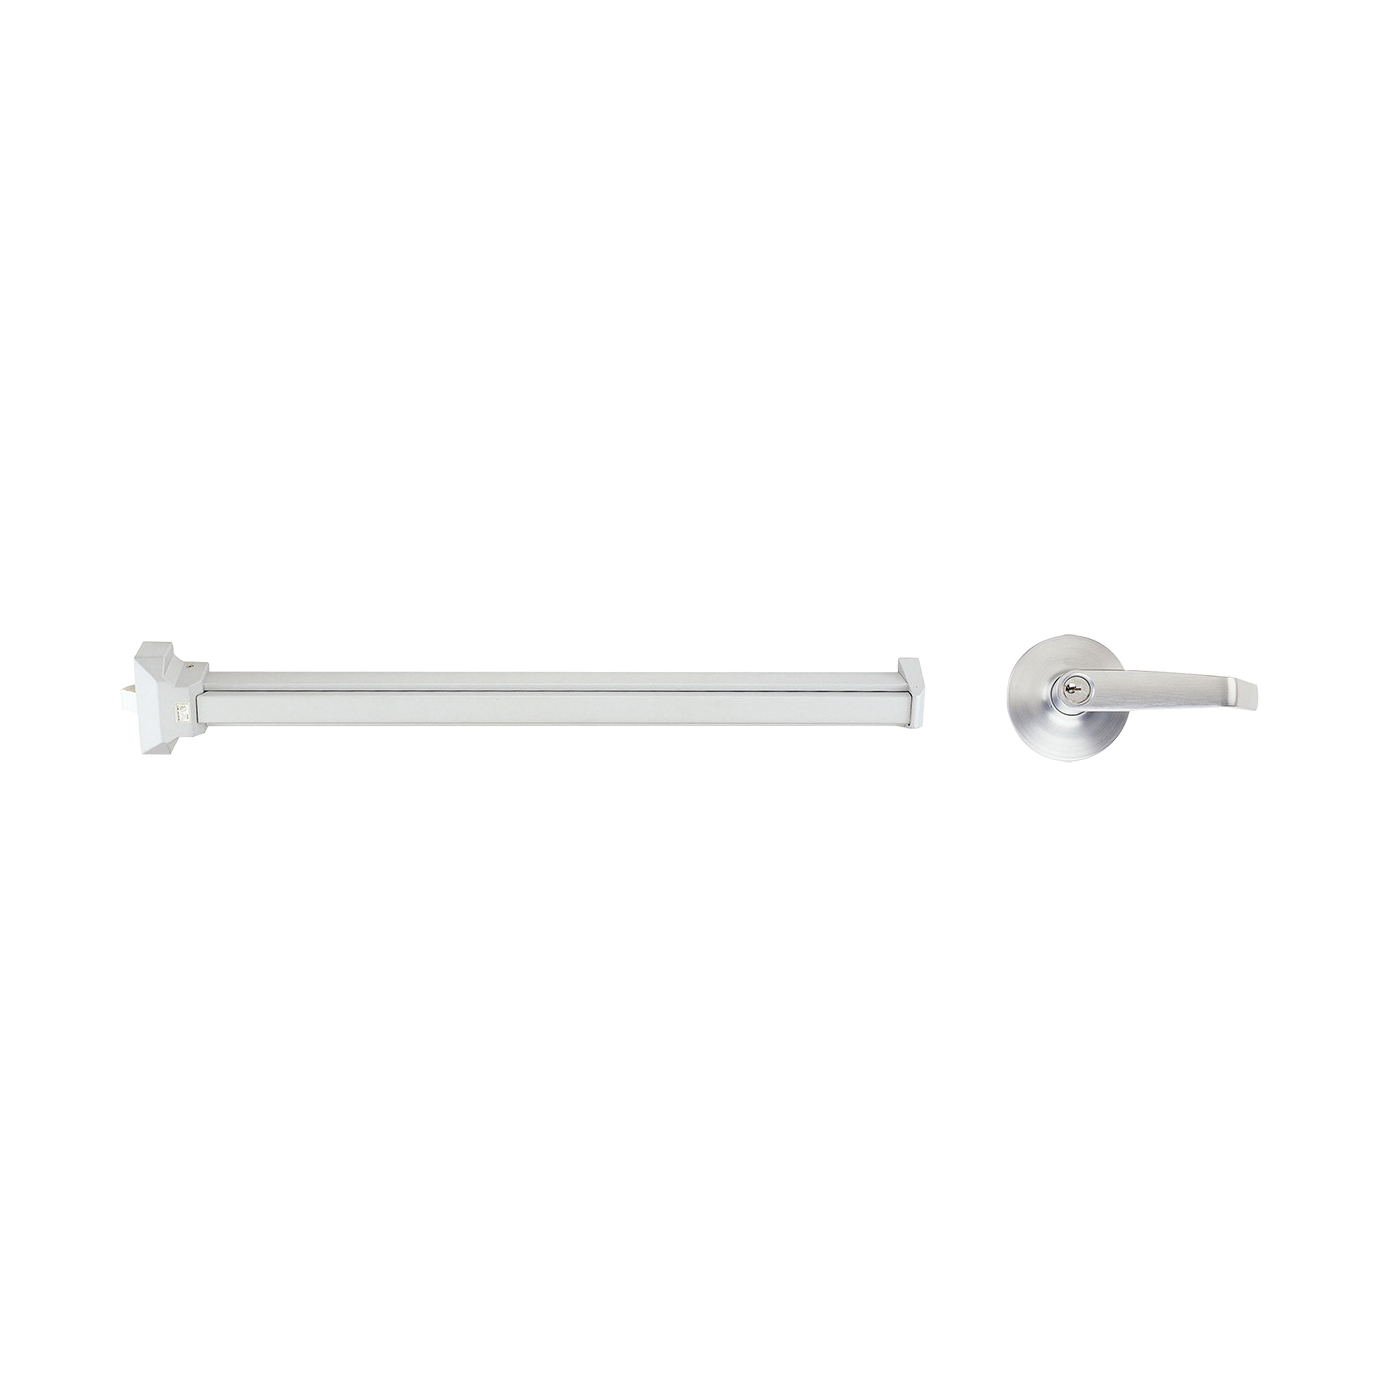 8000-80LS-AS Panic Bar, 32-1/2 in W, Stainless Steel/Steel/Zinc Alloy, Powder-Coated, 1-3/4 in Thick Door